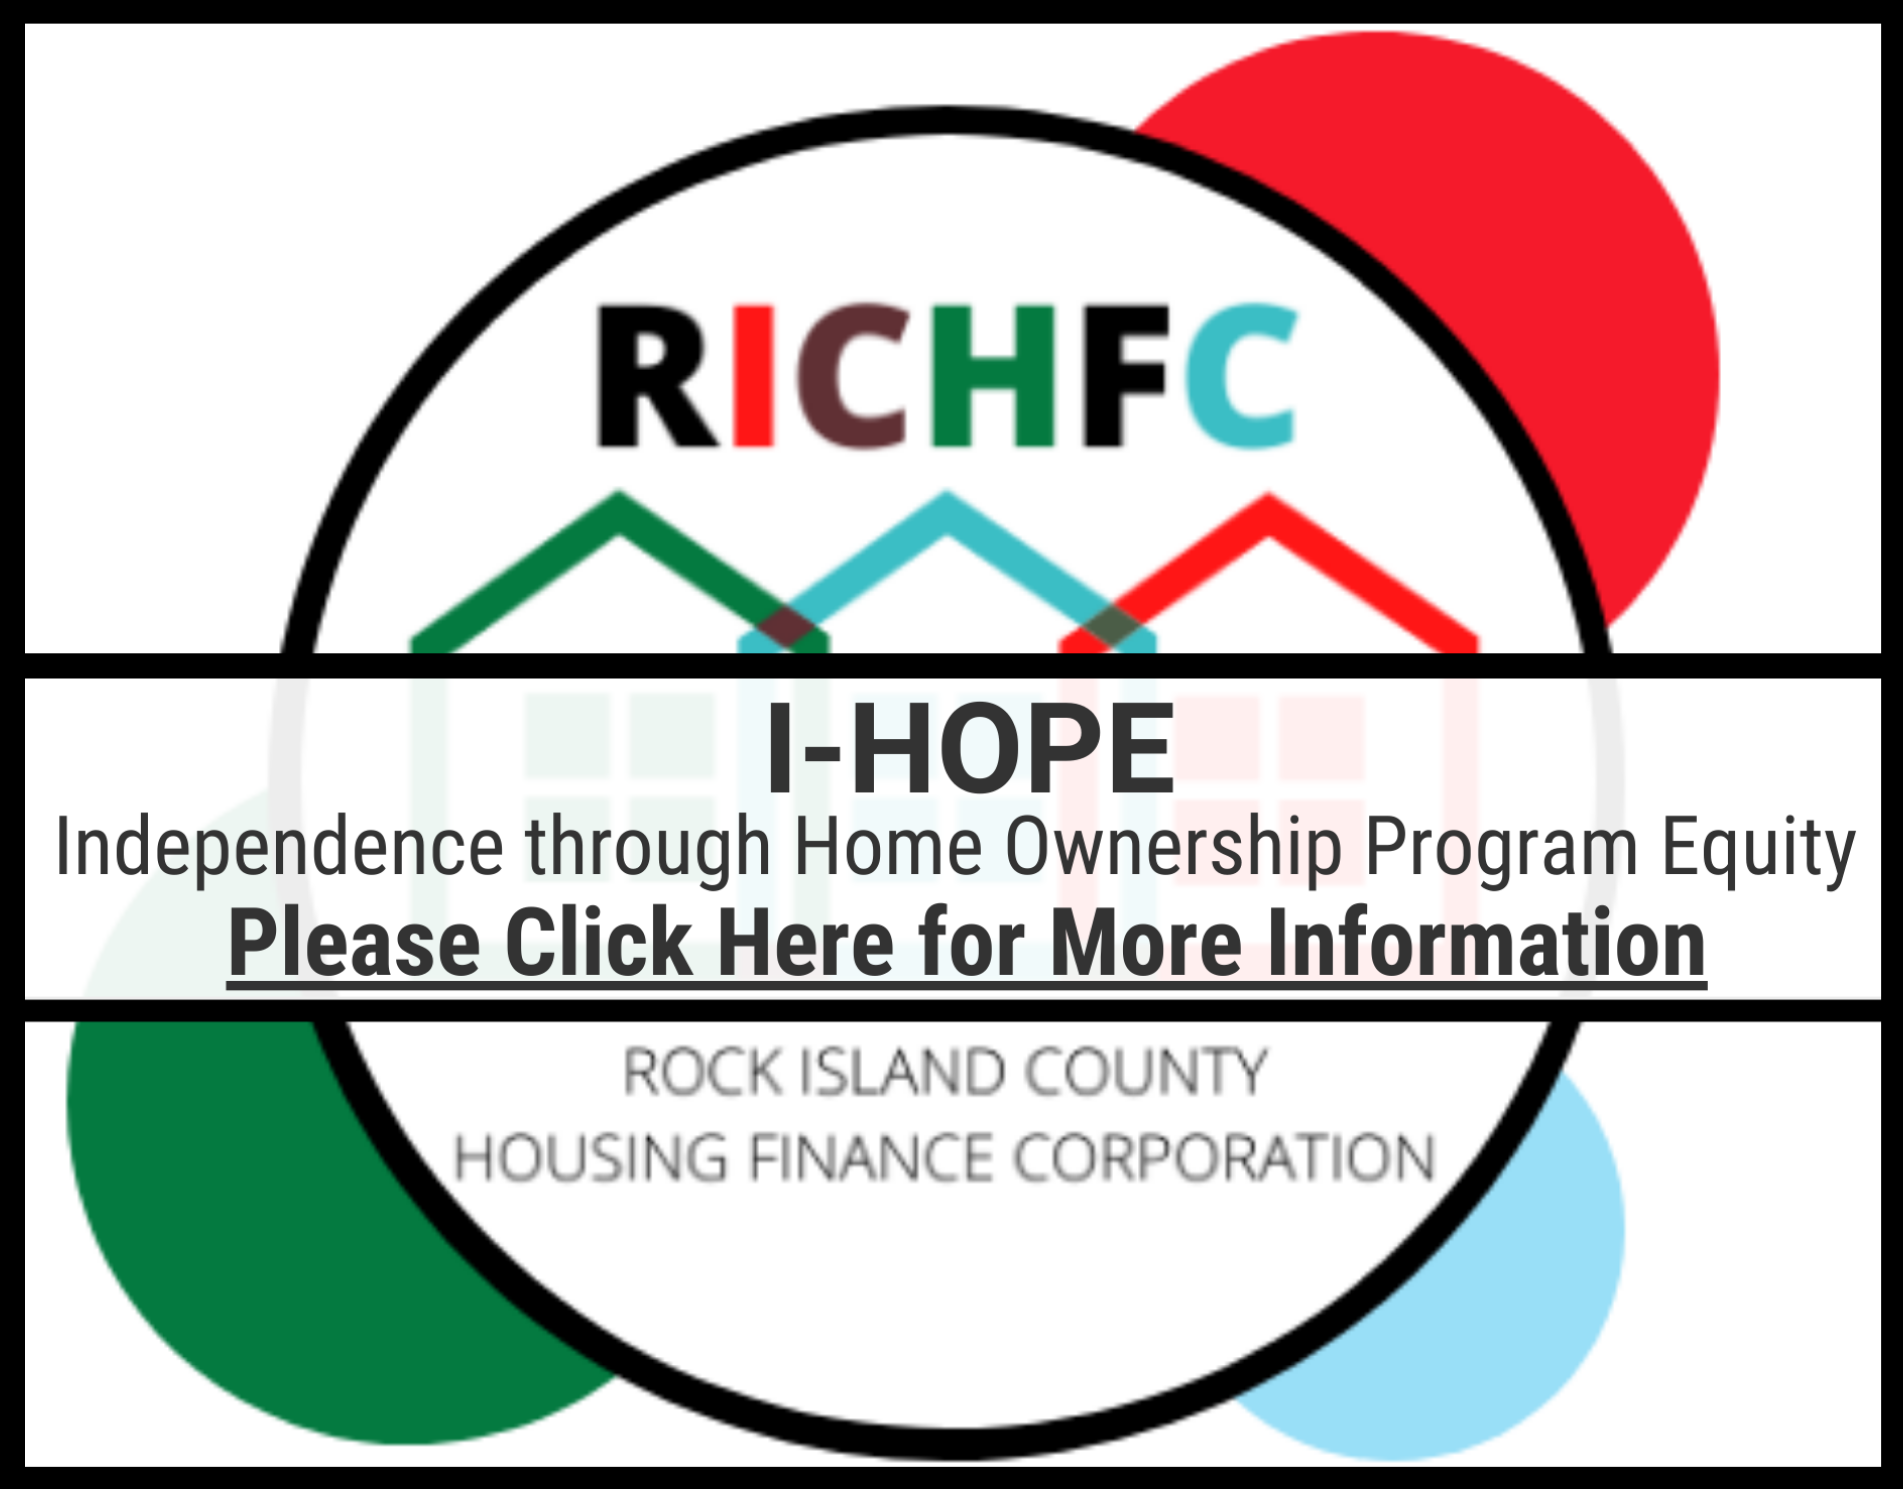 RICHFC I-HOPE (Independence through Home Ownership Program Equity). Please Click Here for More Information